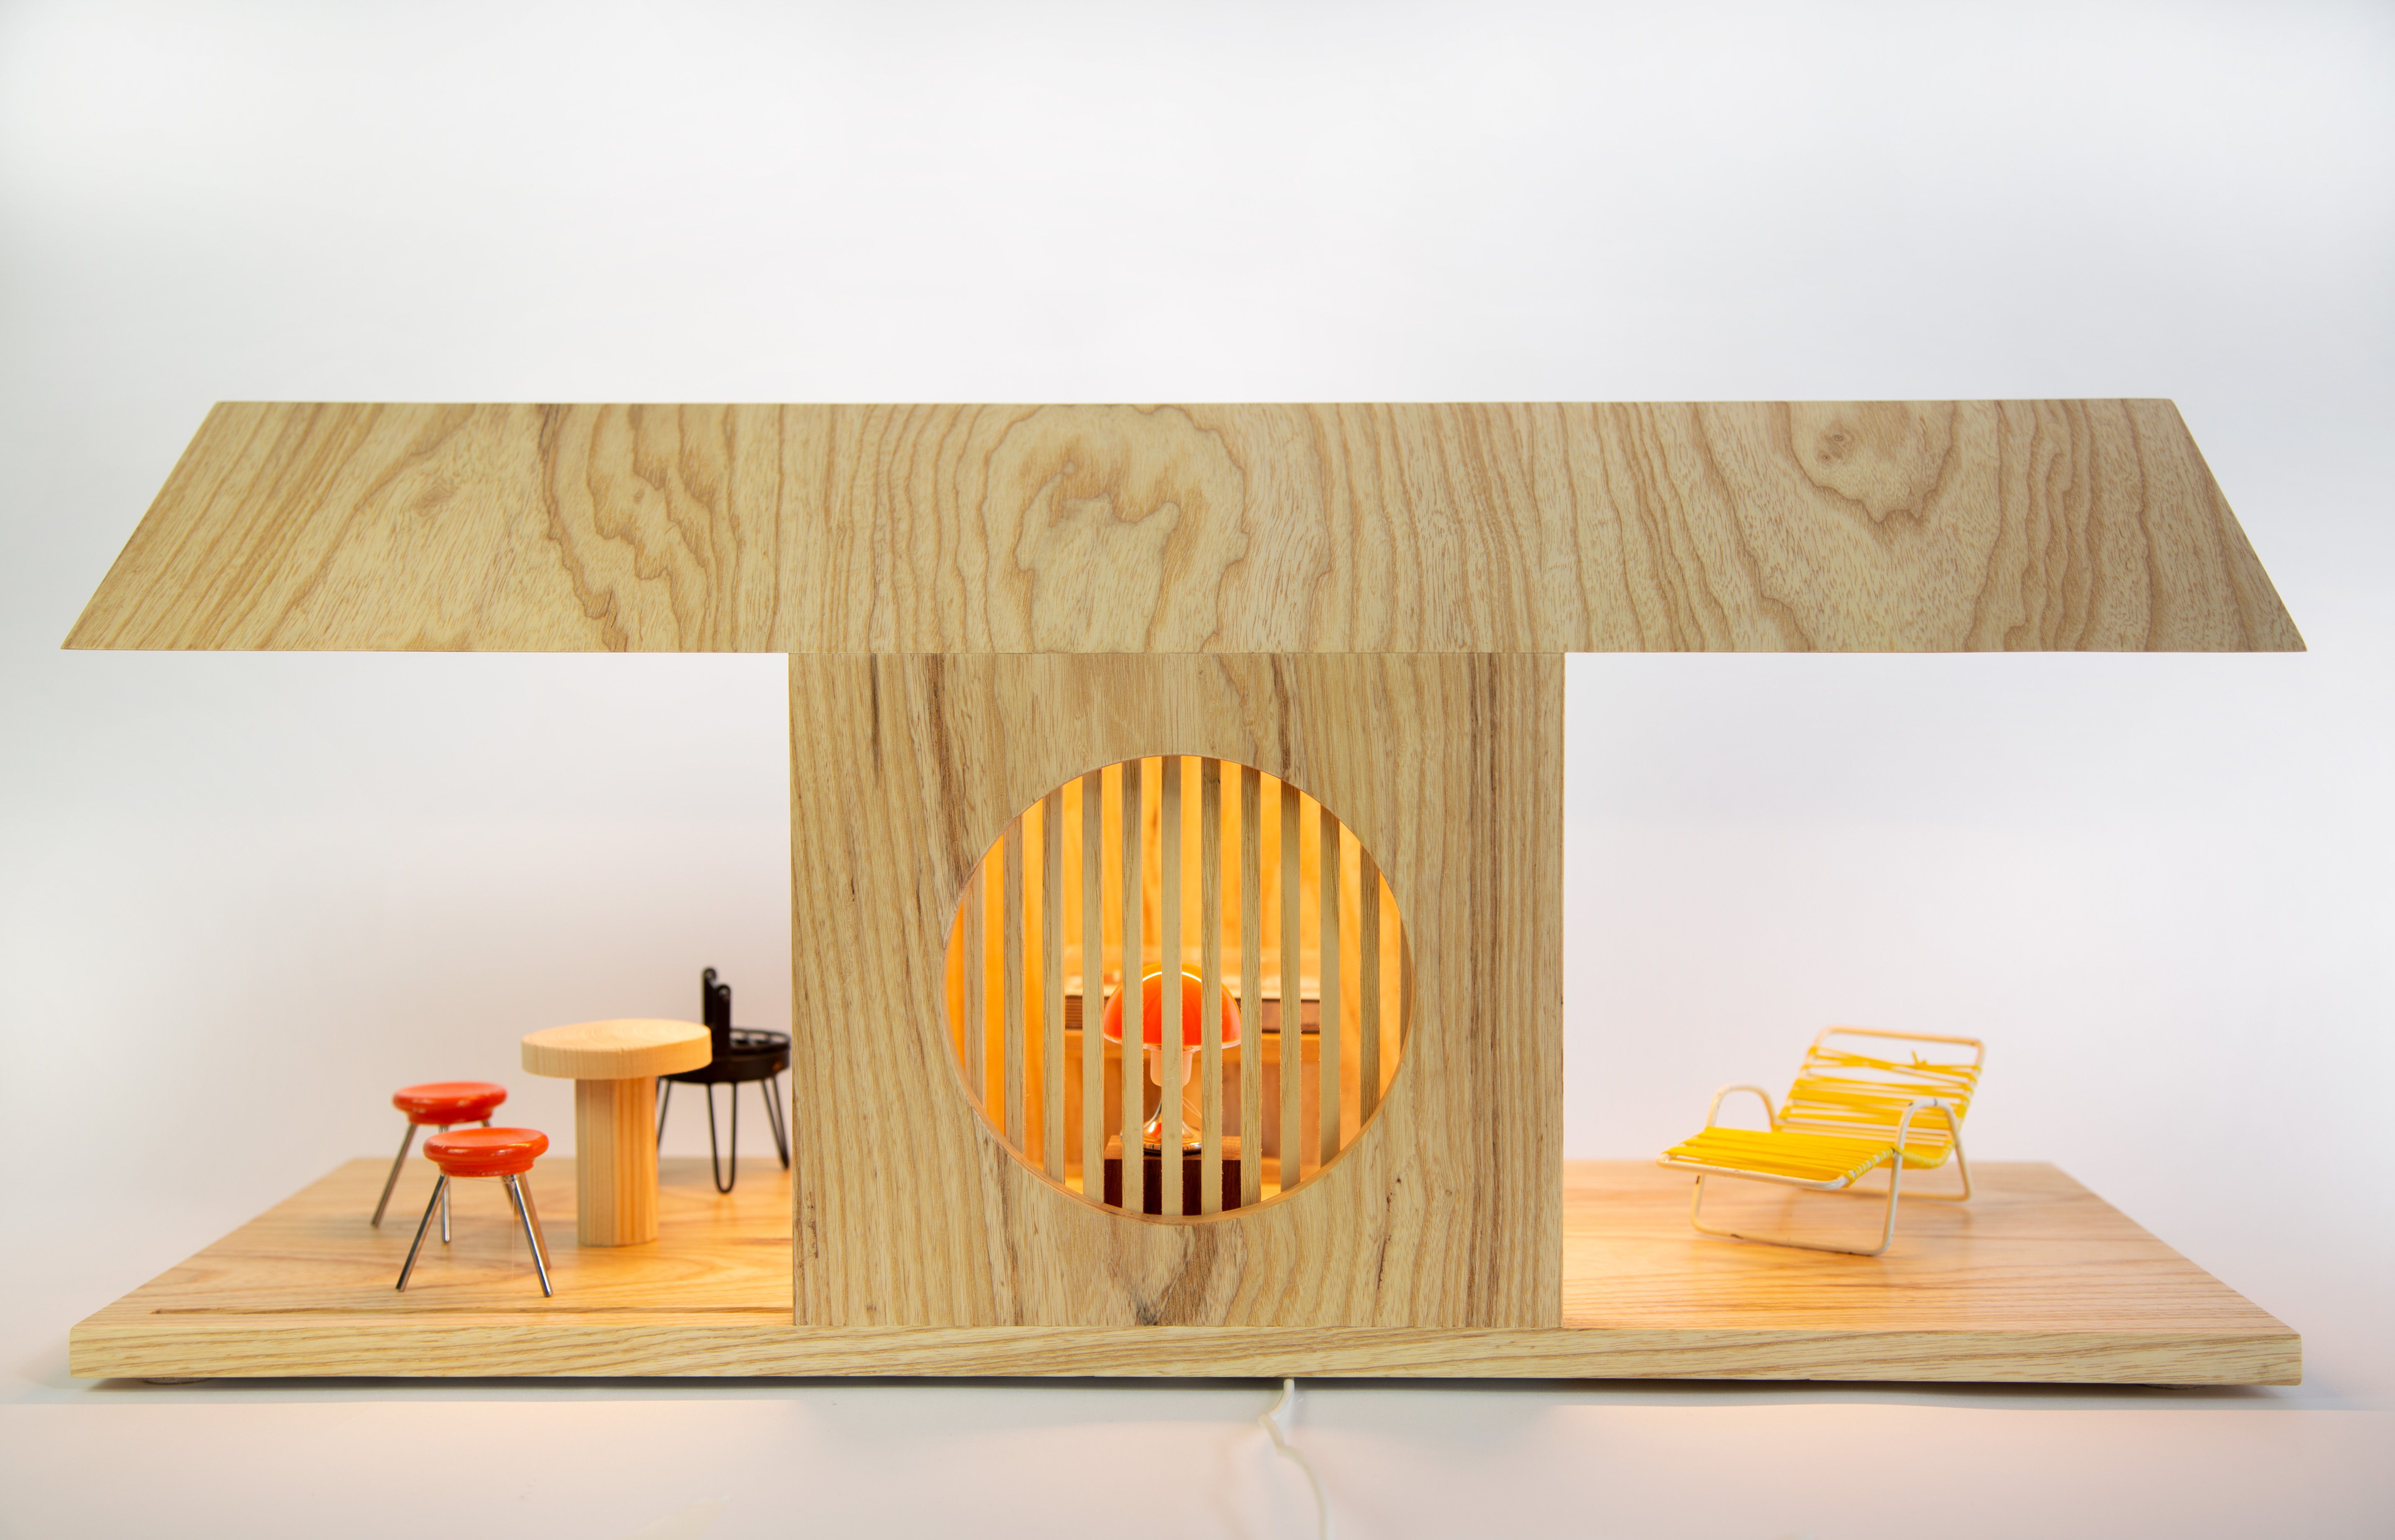 Doll’s House by Studiomama and Doll’s House Furniture, part of R for Repair 2022. Image by Zuketa Film Production